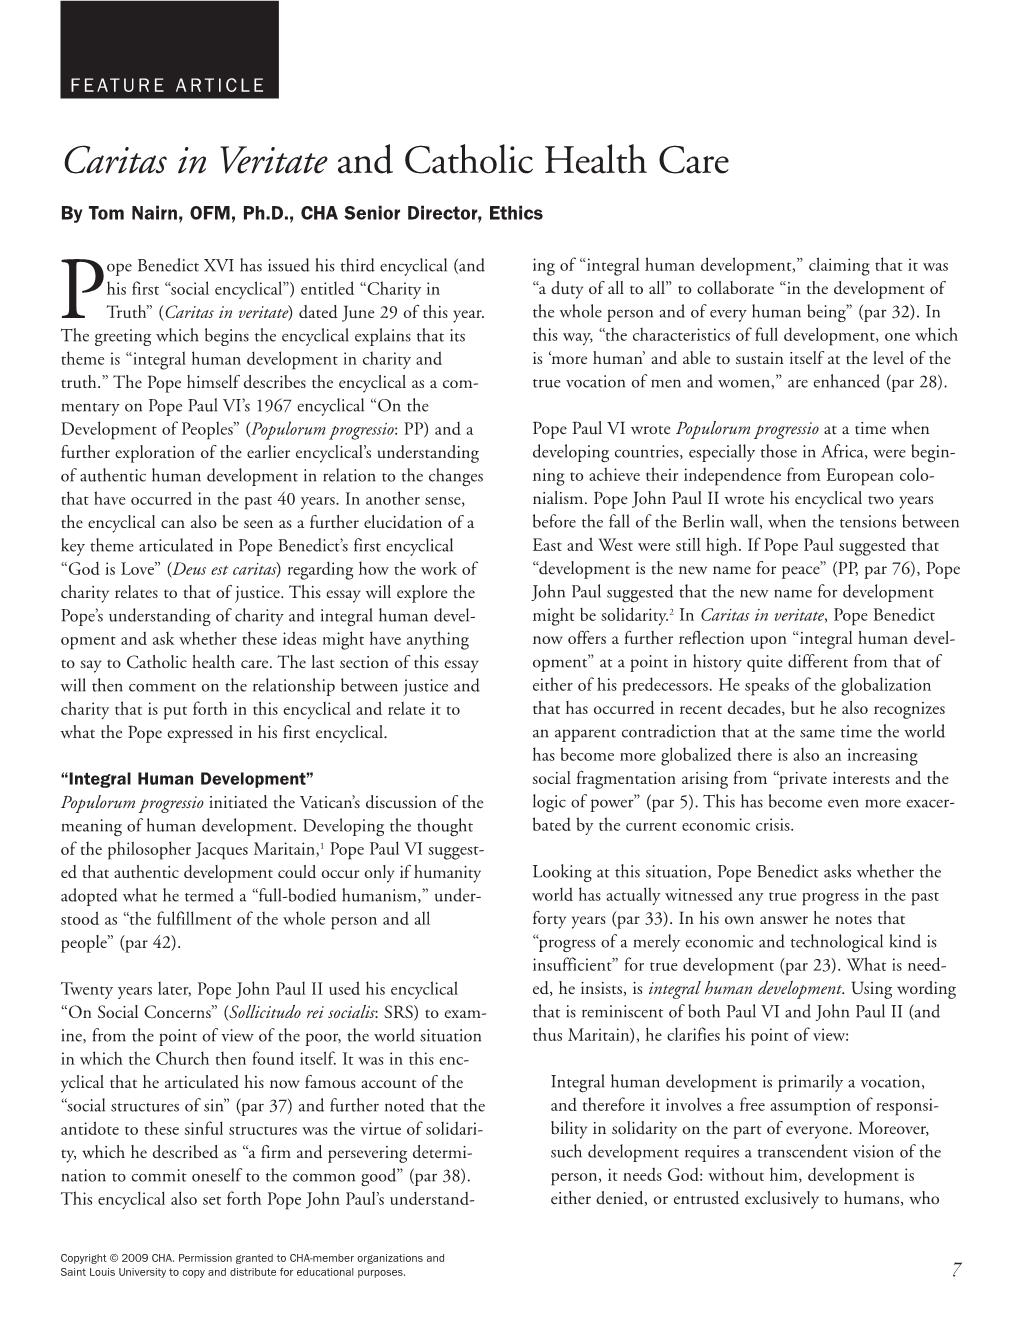 Caritas in Veritate and Catholic Health Care by Tom Nairn, OFM, Ph.D., CHA Senior Director, Ethics